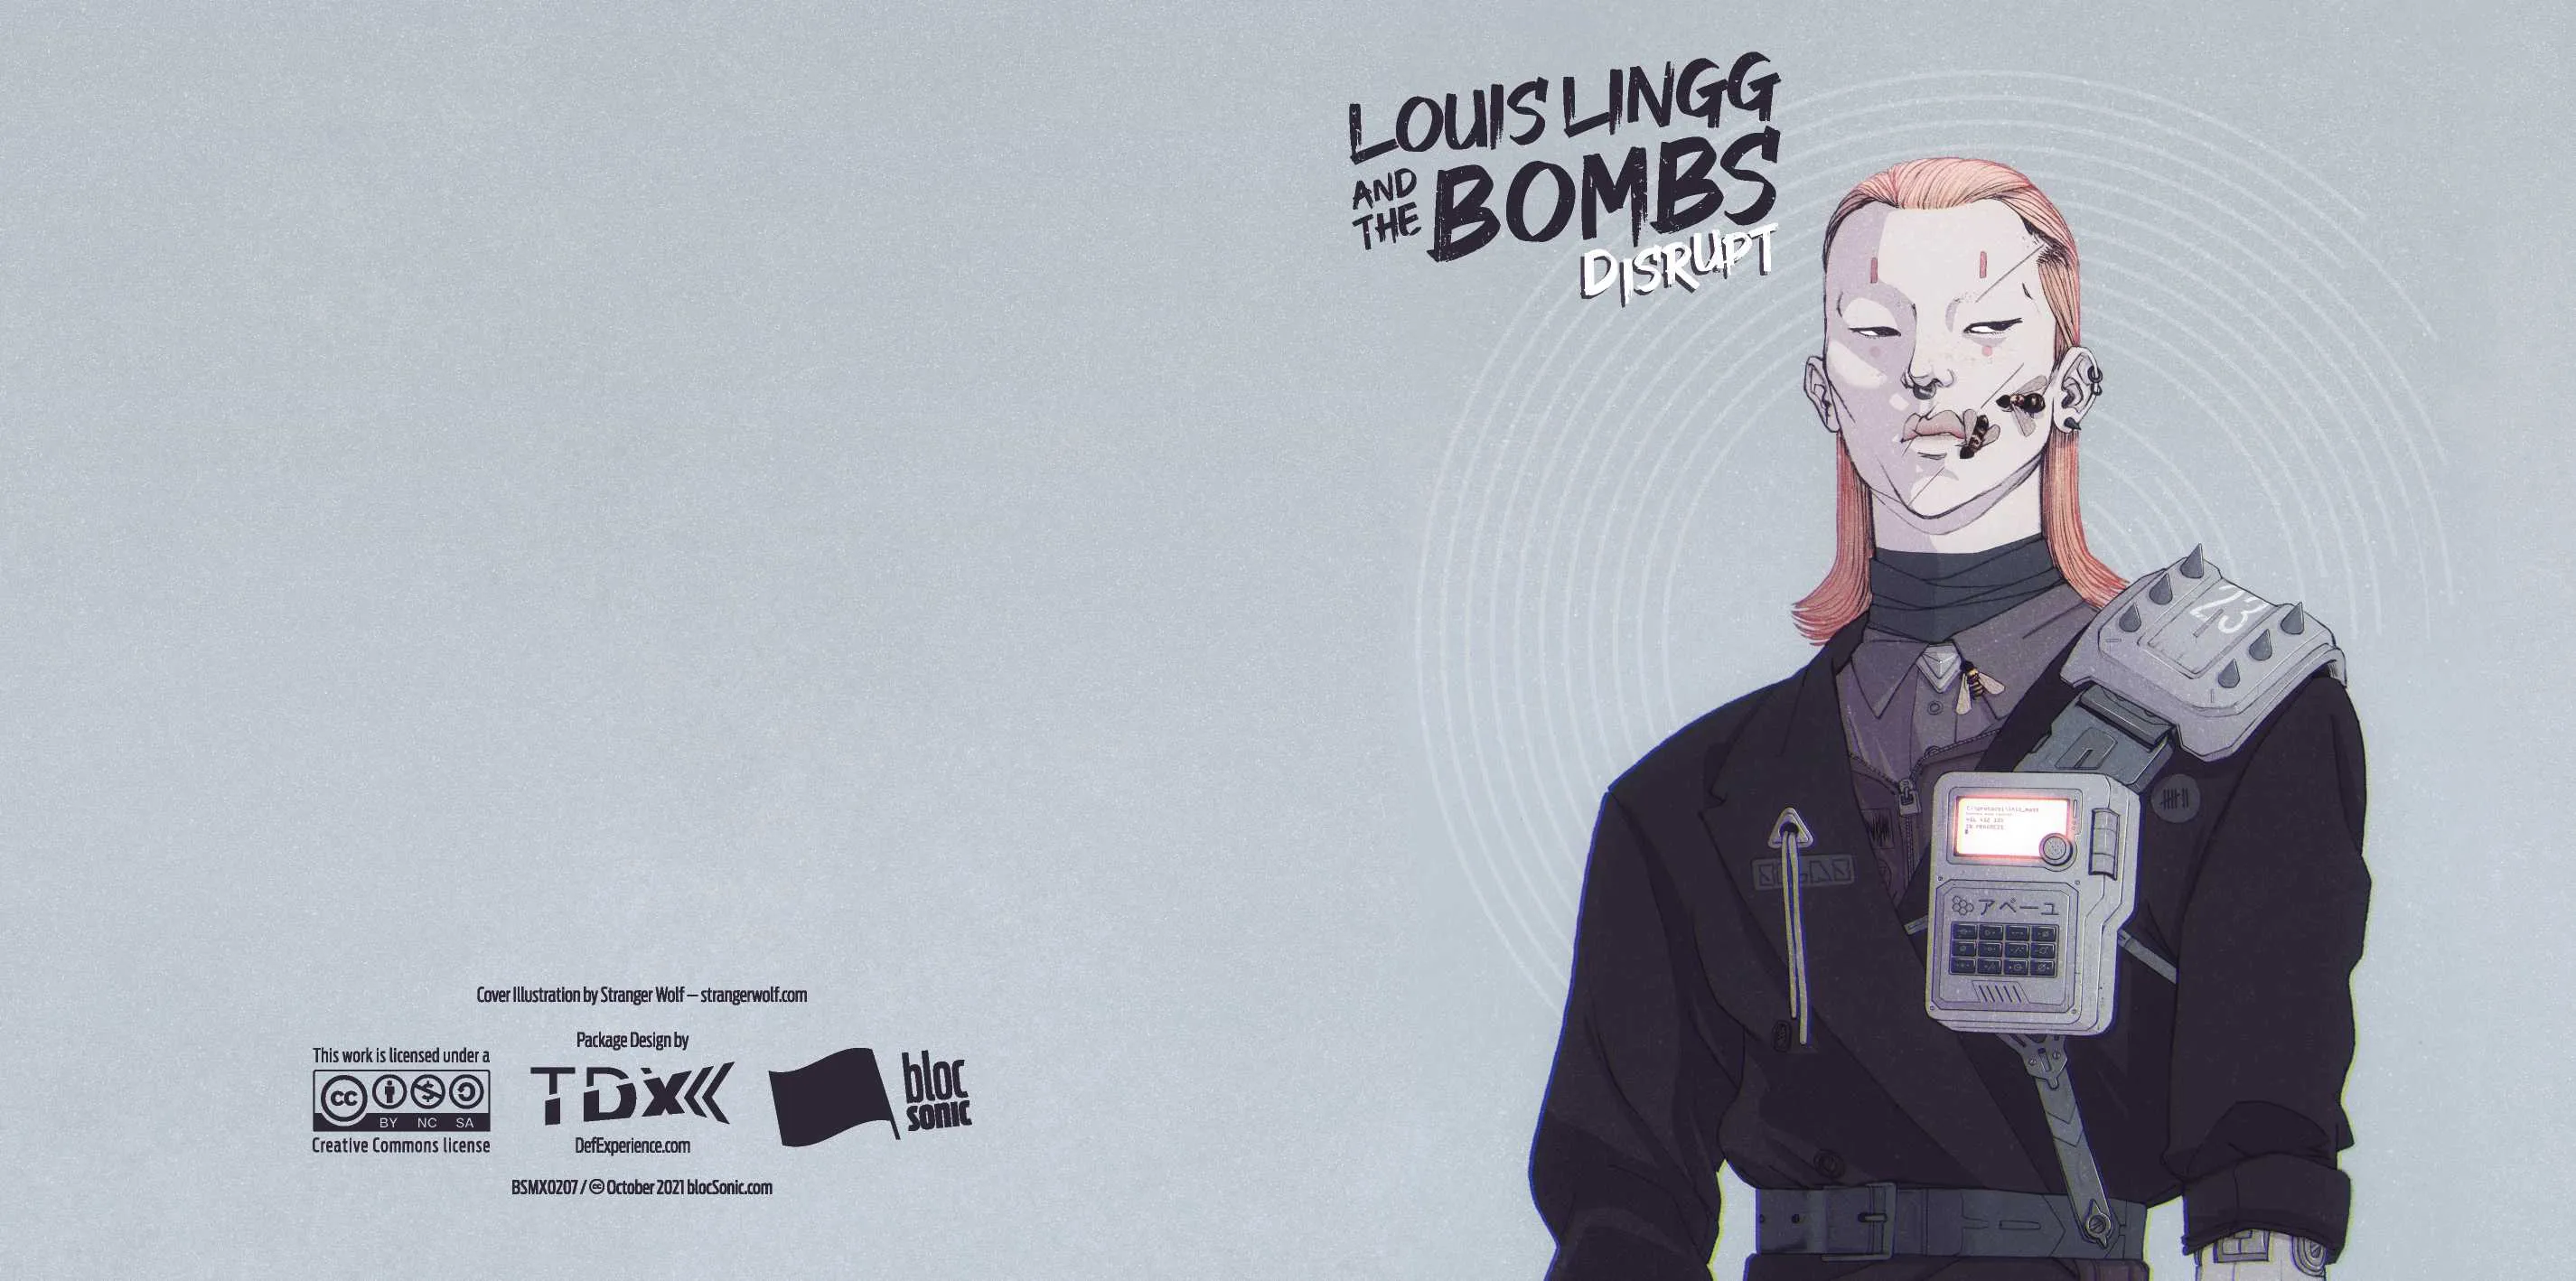 Album insert for “Disrupt” by Louis Lingg and The Bombs